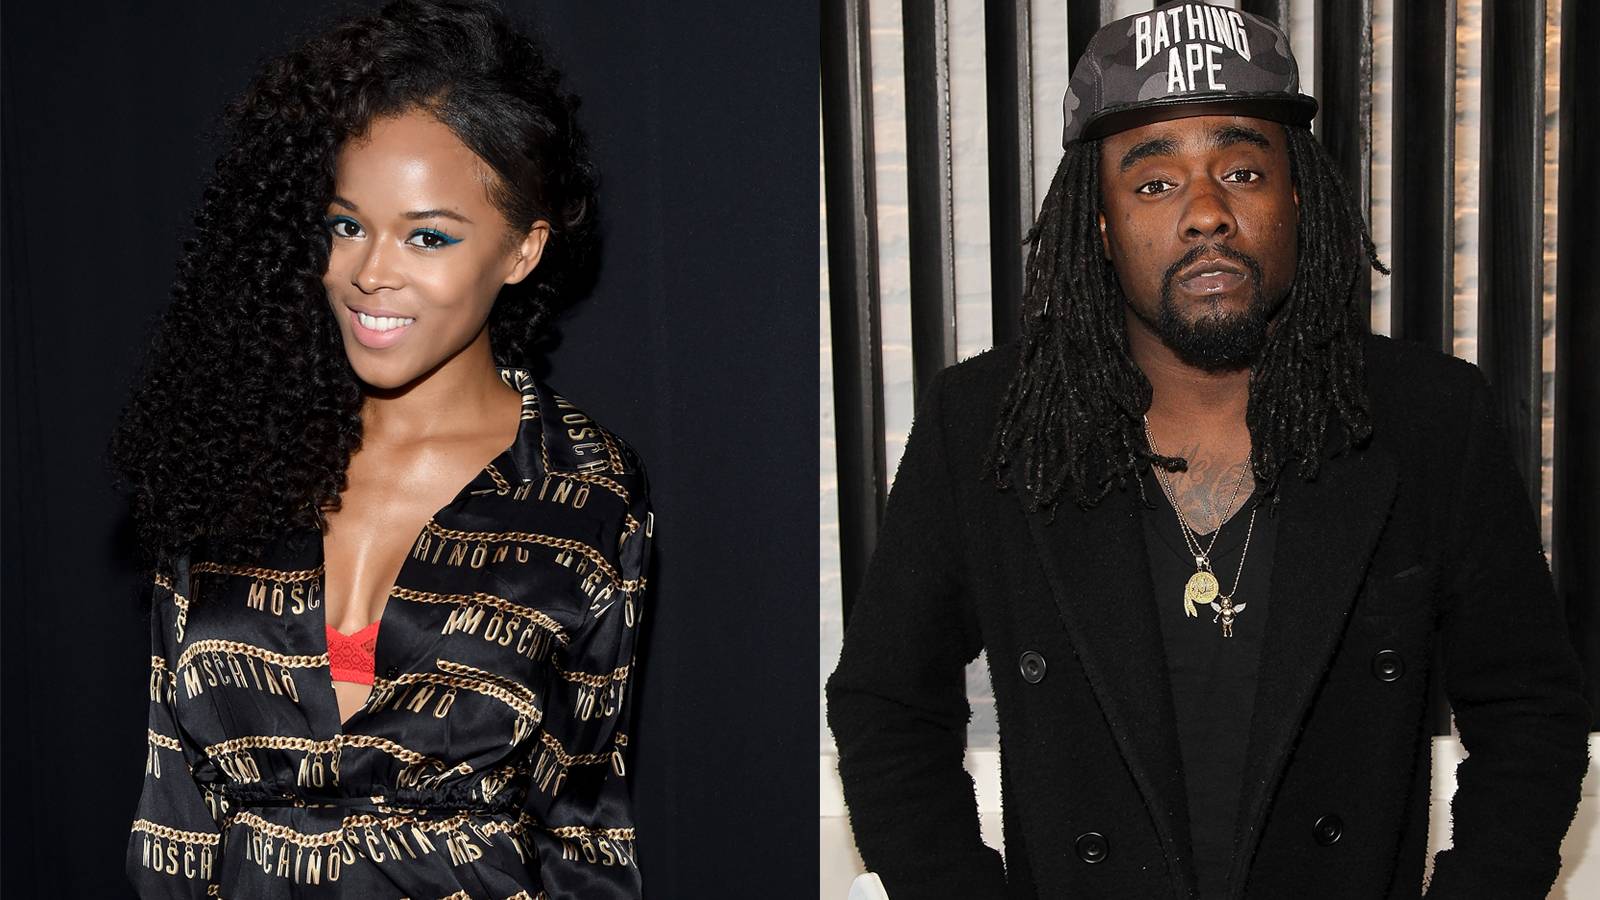 What would hip-hop star Wale do if the Nationals got rid of